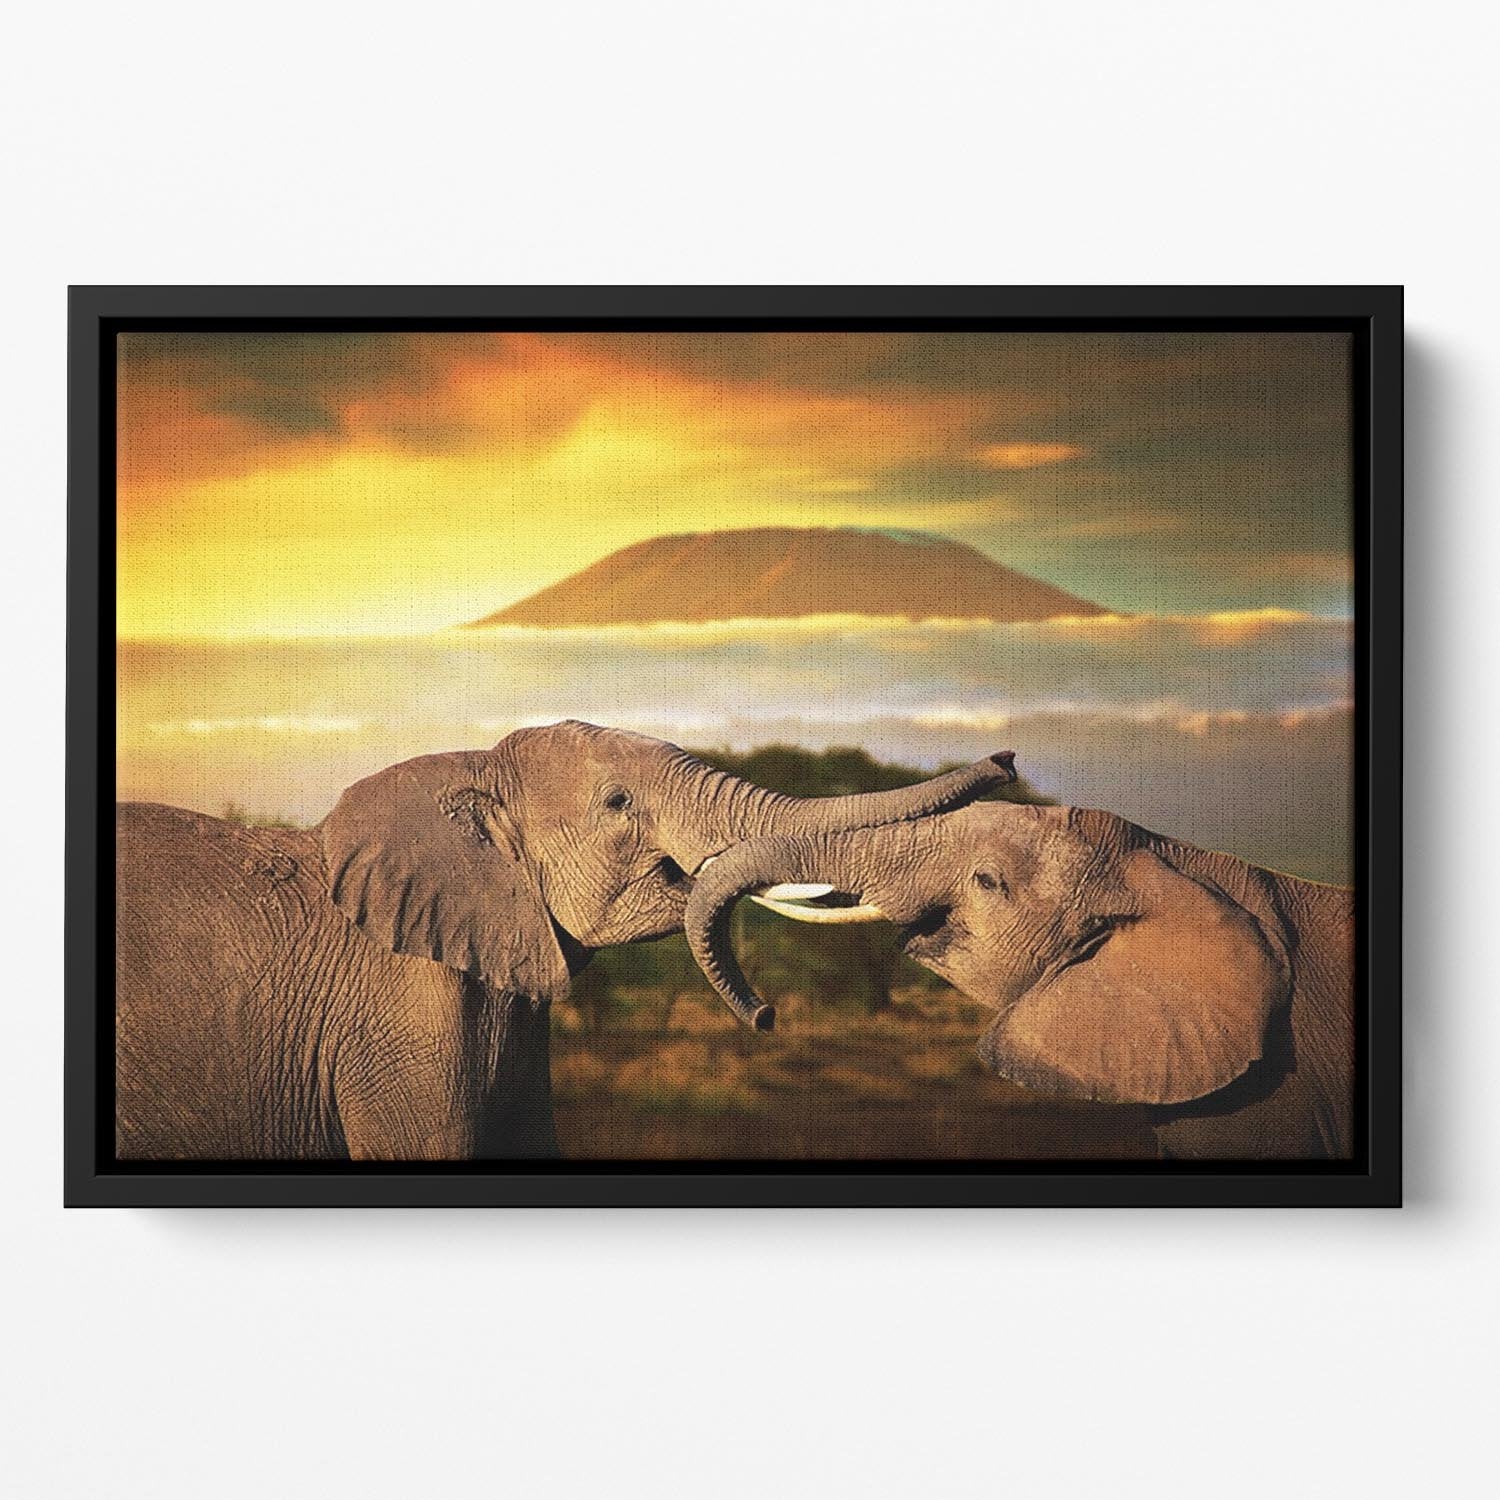 Elephants playing with their trunks Floating Framed Canvas - Canvas Art Rocks - 2